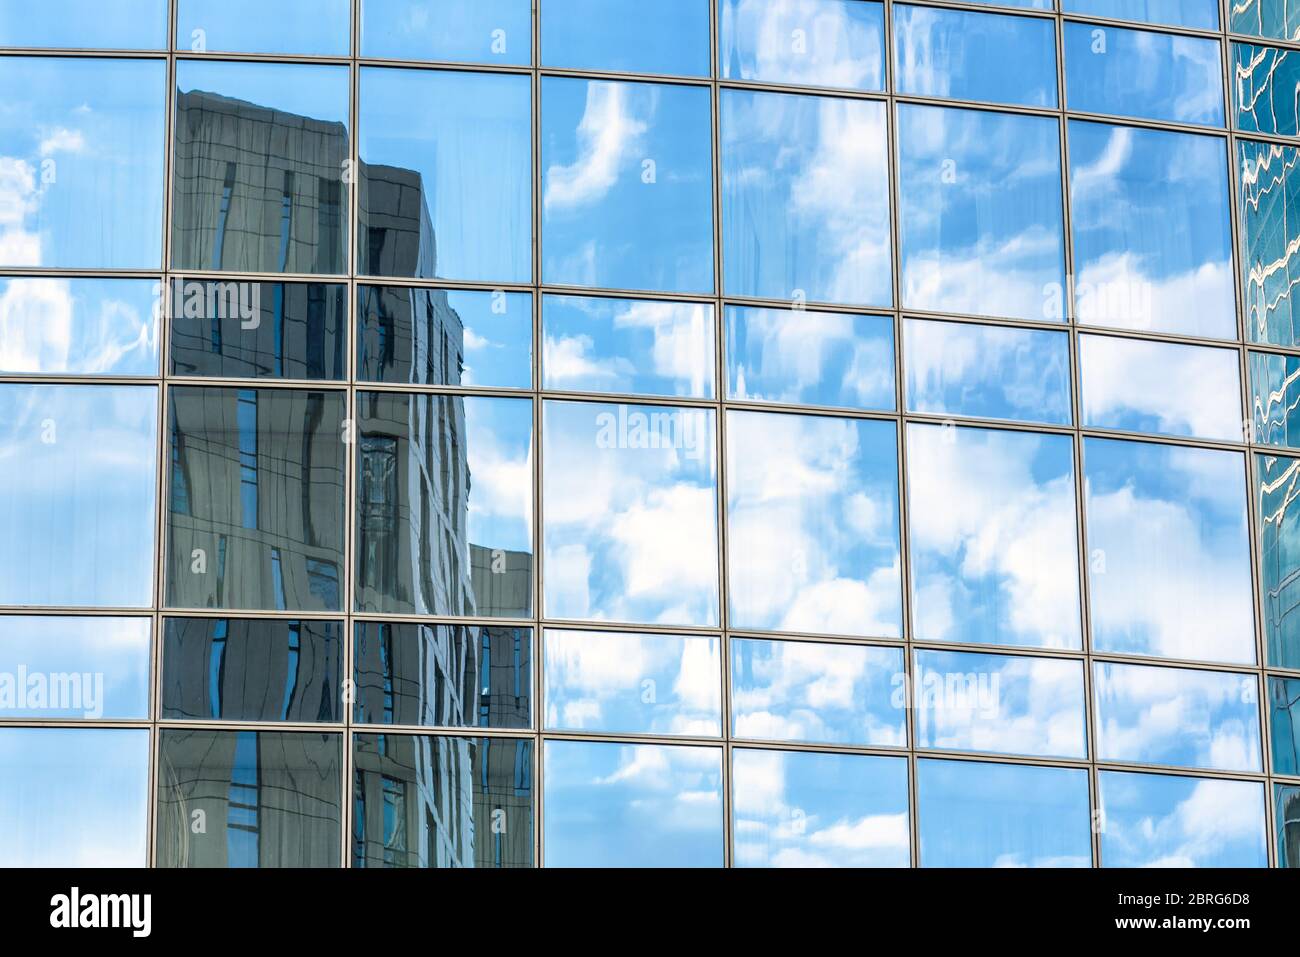 Abstract architecture background. Sky and buildings are reflected in the office skyscraper facade. Concept of modern urban constructions and business. Stock Photo